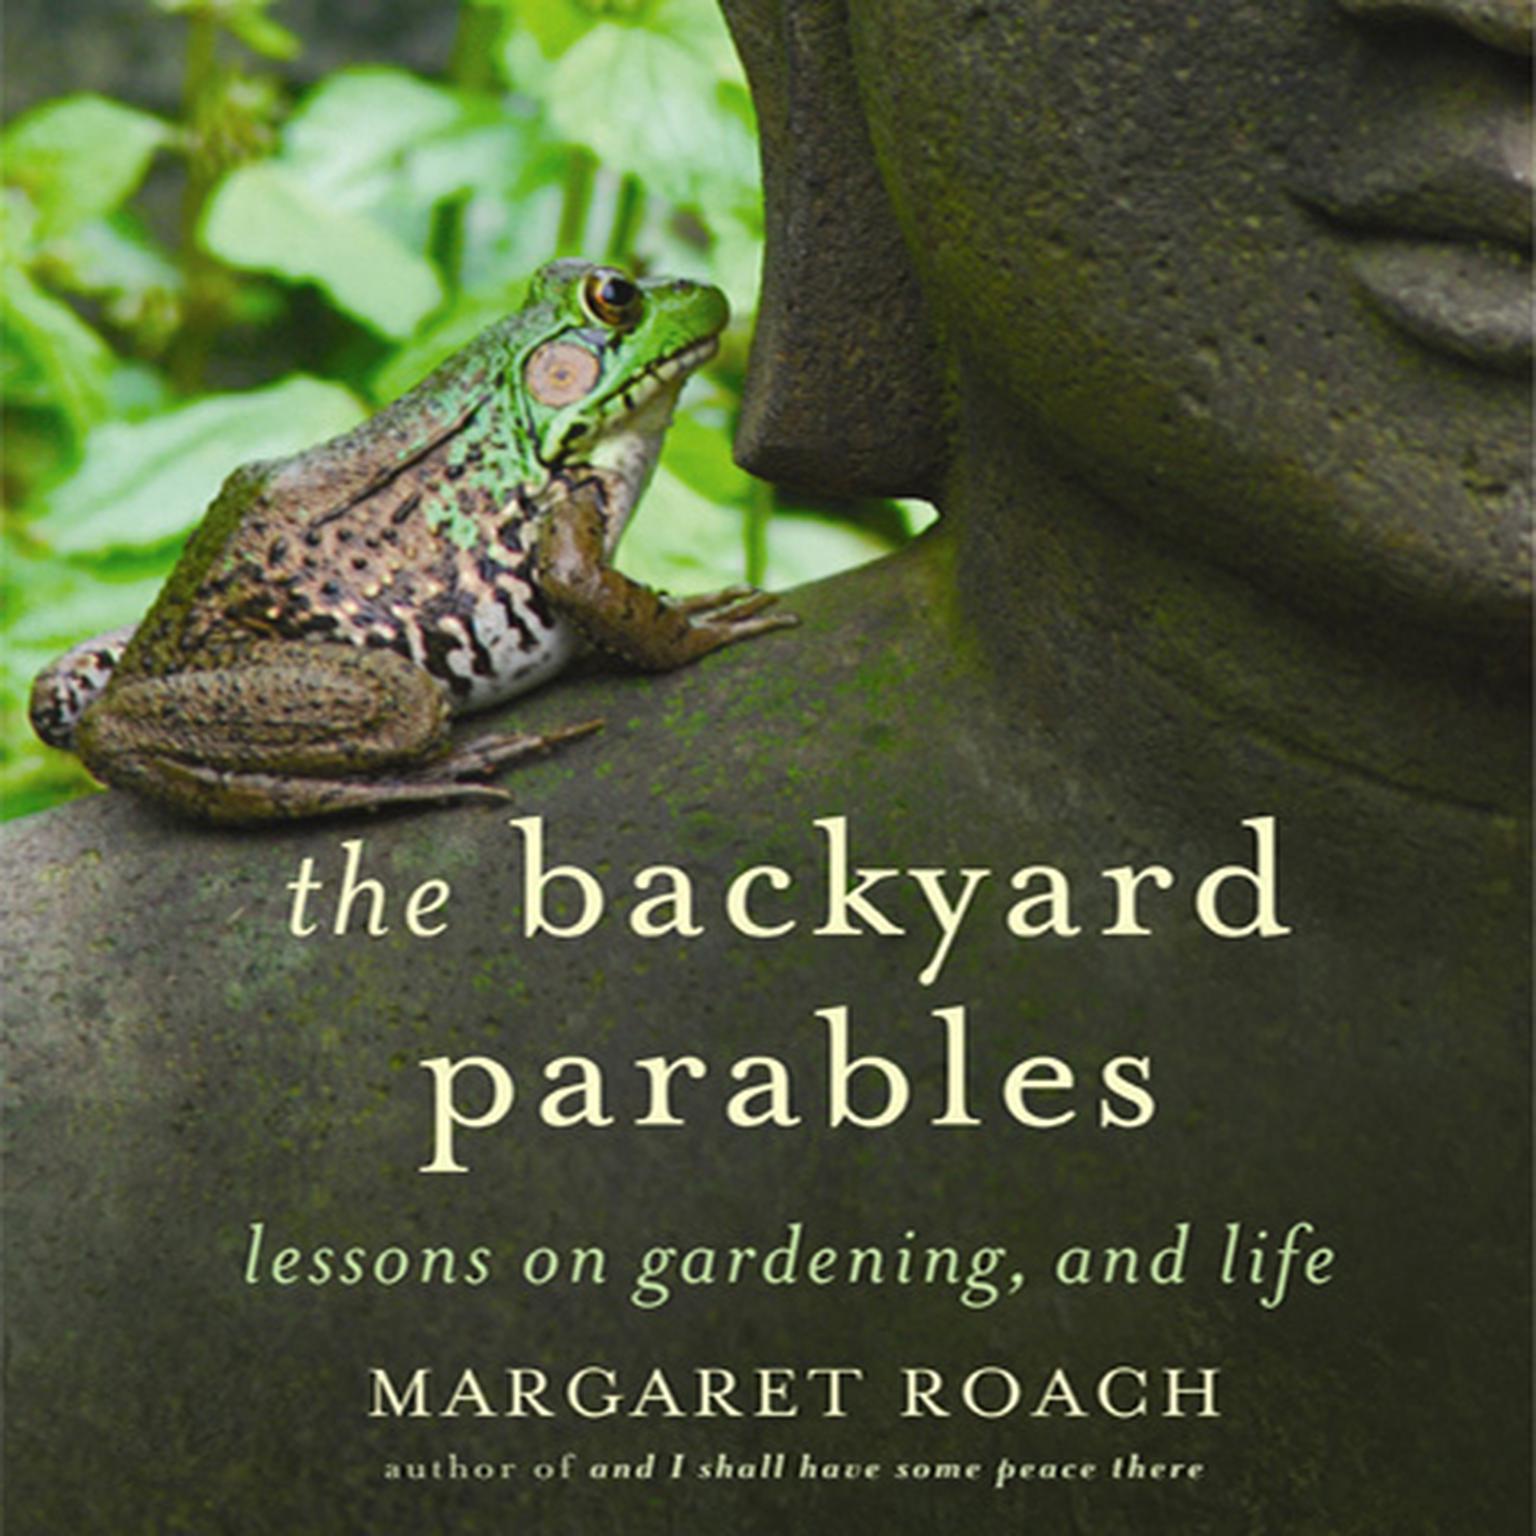 The Backyard Parables: Lessons on Gardening, and Life Audiobook, by Margaret Roach